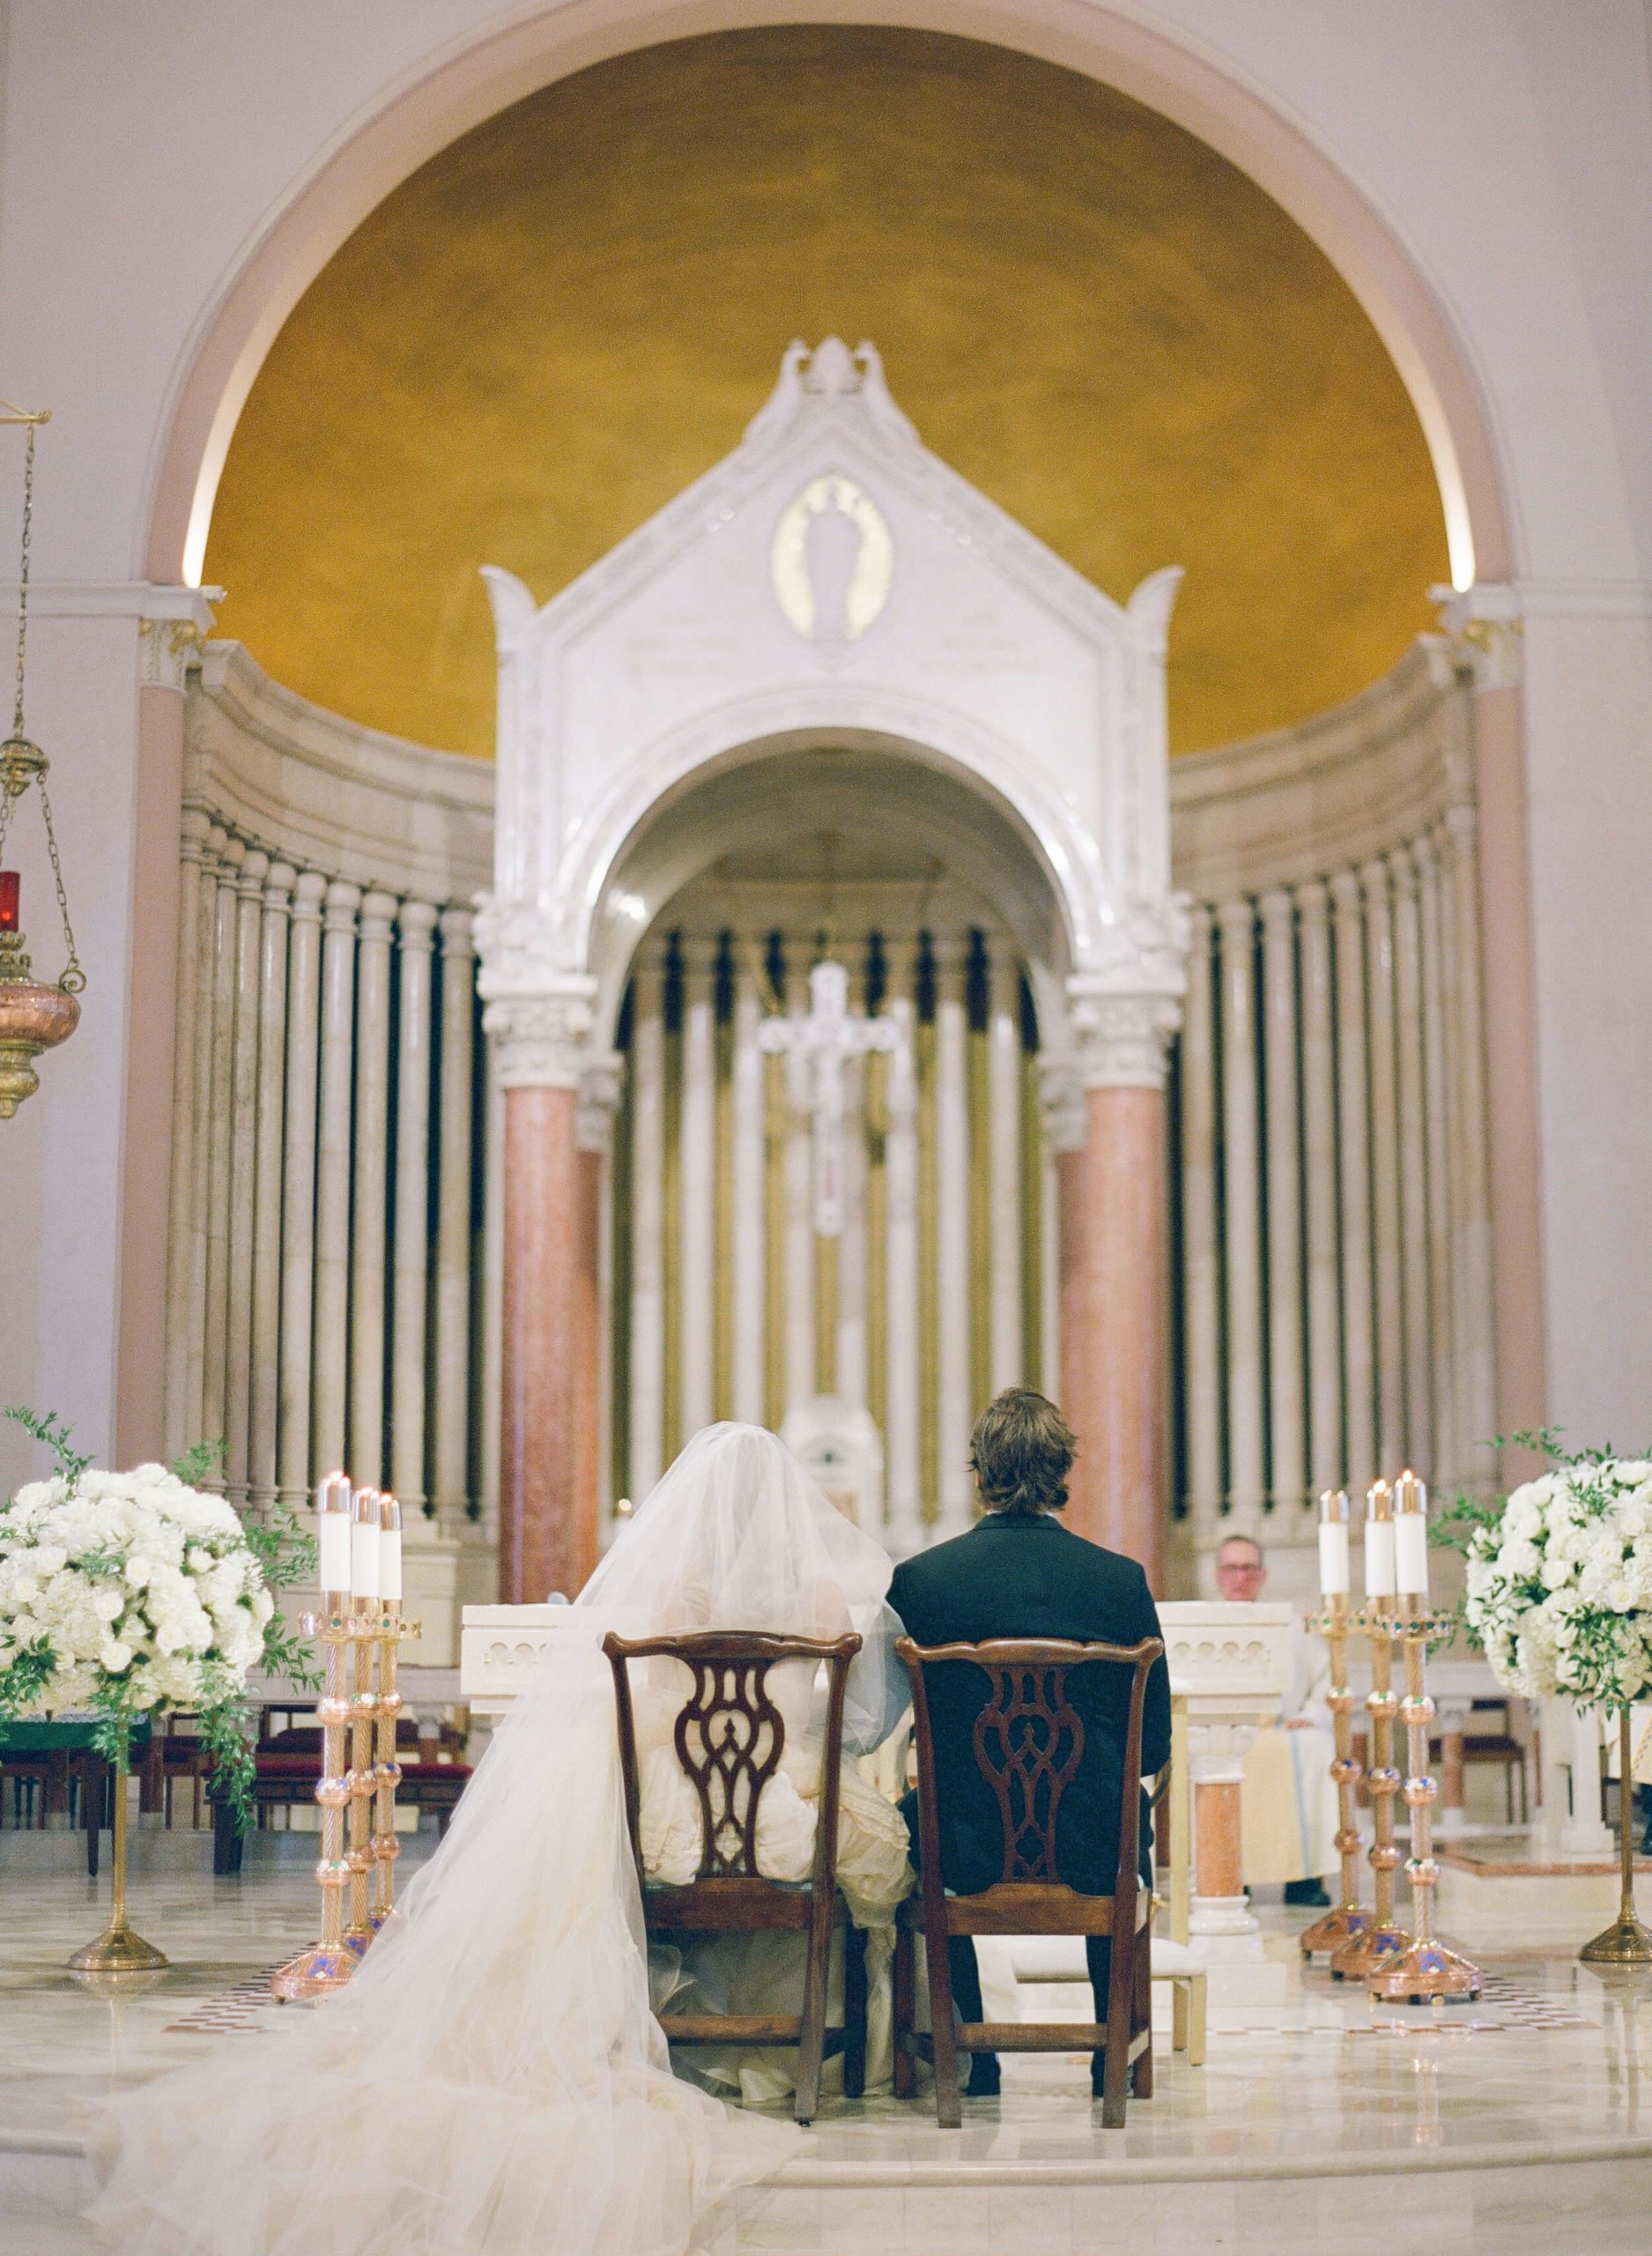 Eunice and Mikey married at St. Patricks Catholic Church in Miami, where she grew up going all her life.